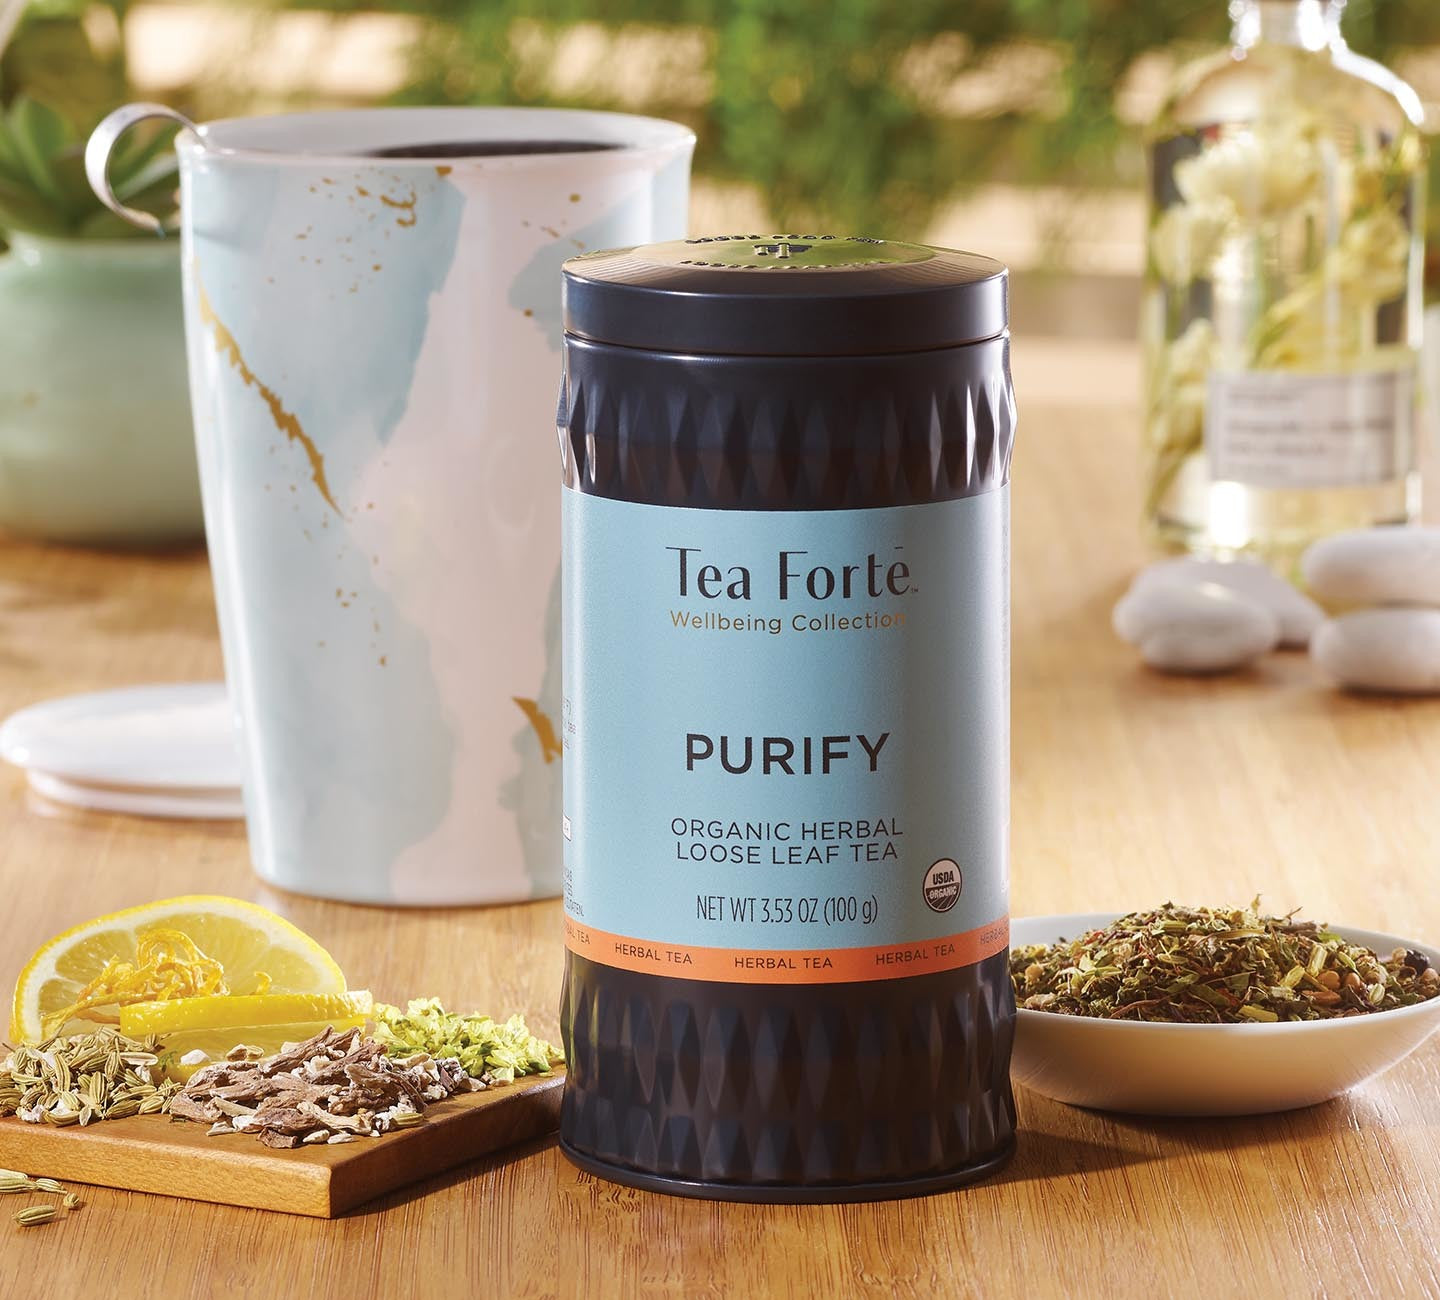 urify Loose Tea Canister and a Wellbeing KATI Steeping Cup